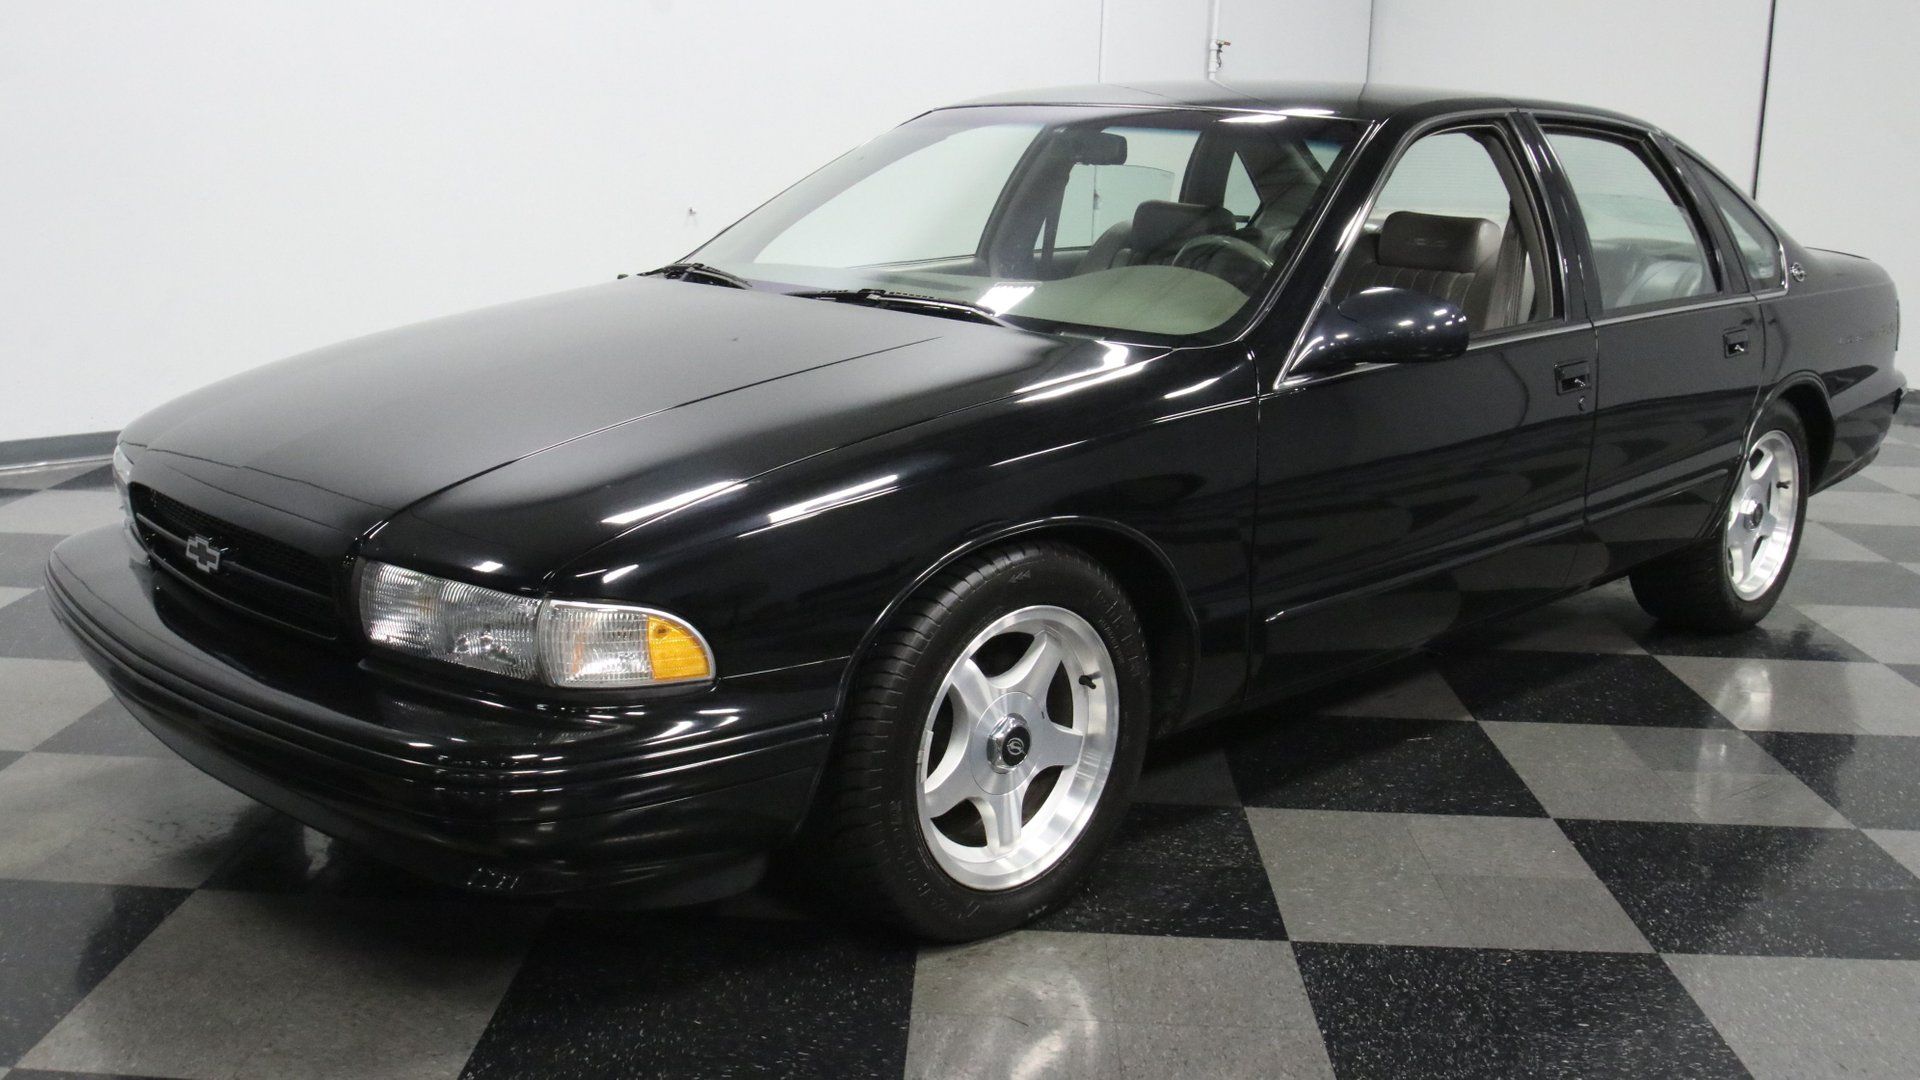 1996 Chevrolet Impala Ss Is A Collectible Muscle Car